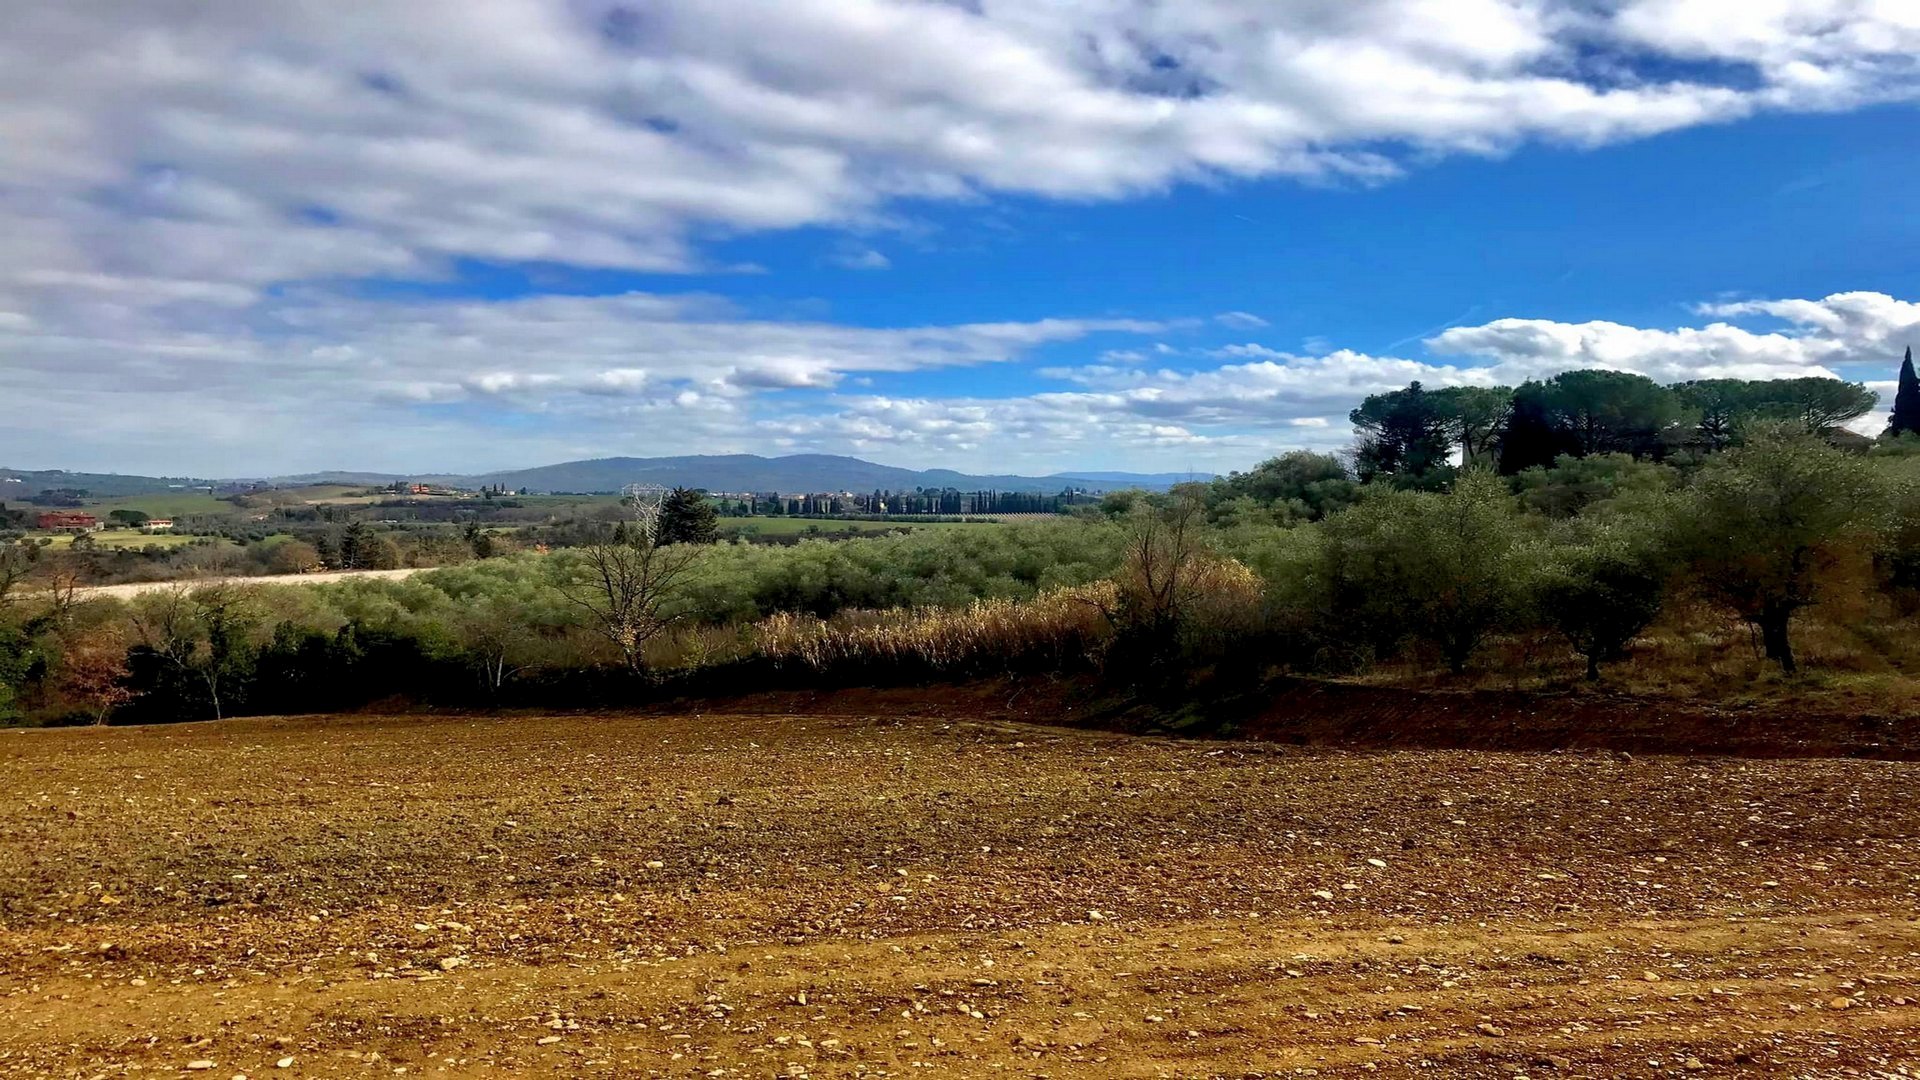 Trekking through the Medici countryside of the Montalbano area, near Florence